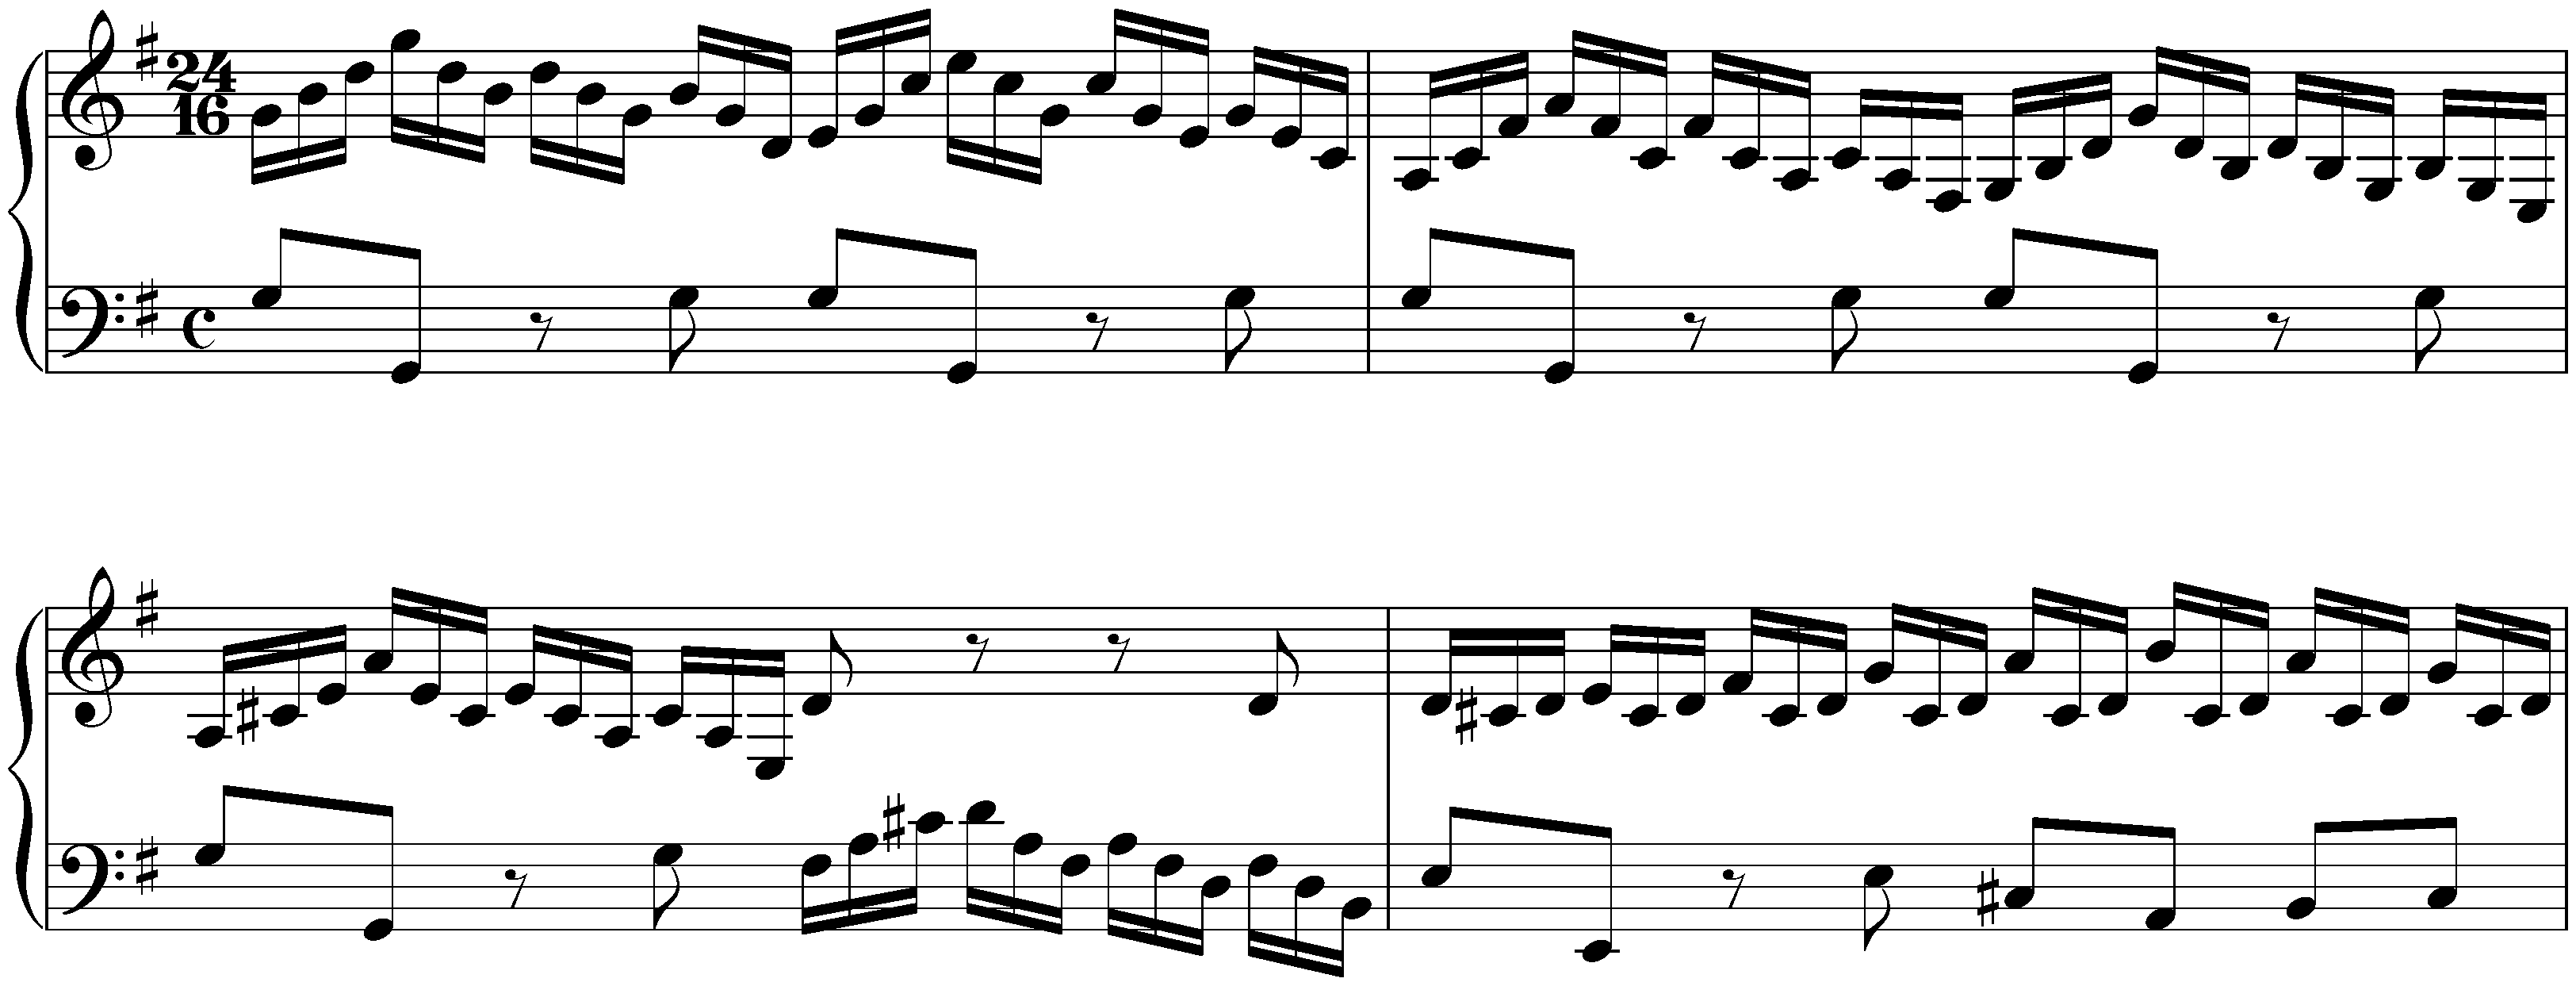 The Well-Tempered Clavier, Book 1, BWV 846–869; 15. G major, BWV 860, Prelude